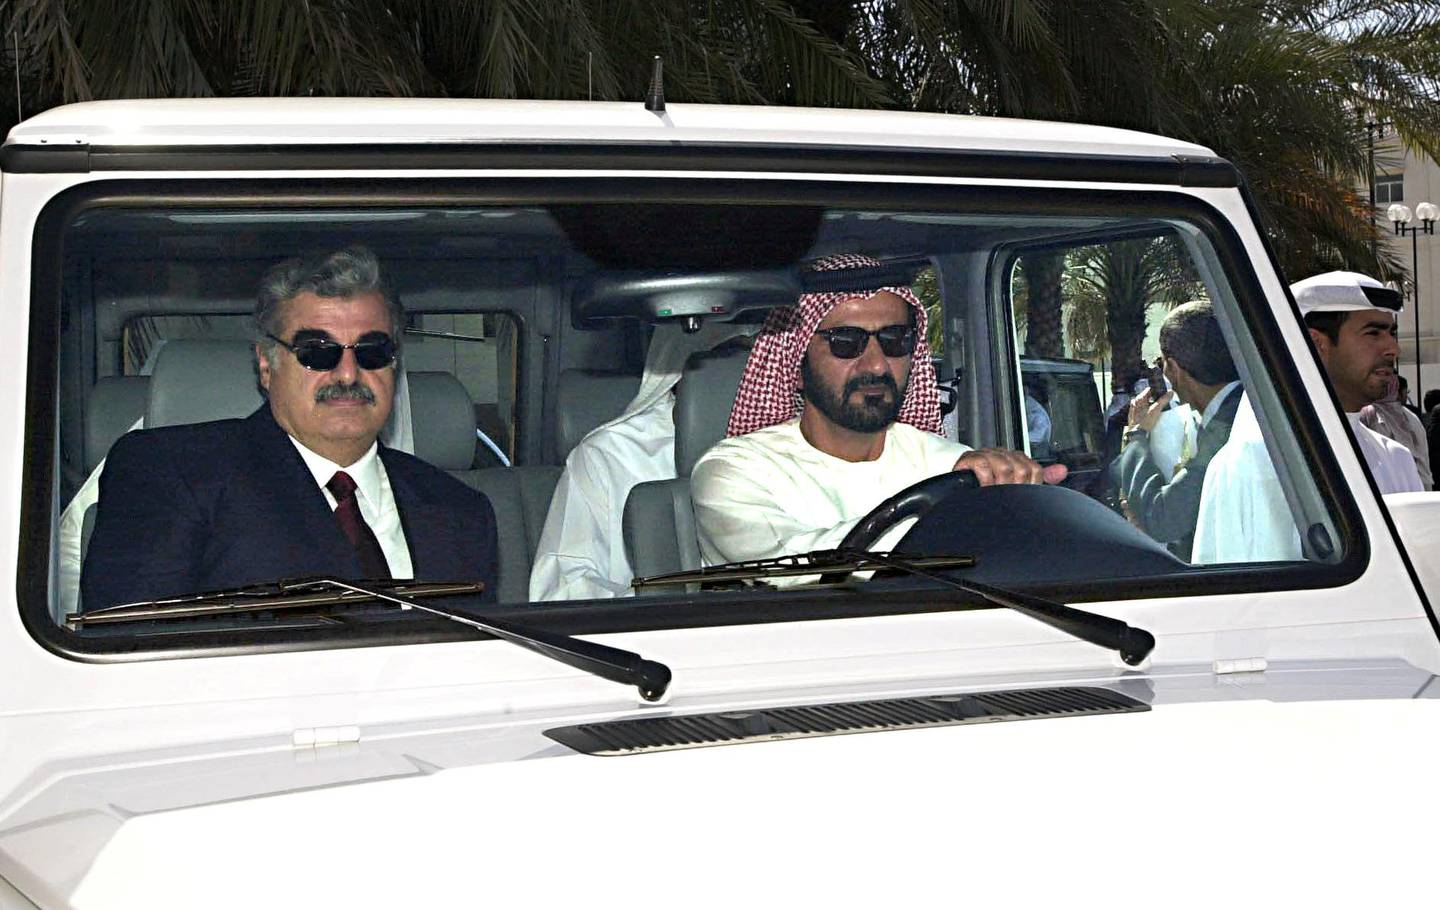 Crown Prince of Dubai Mohammed bin Rashed al Maktoum (R) leads former Lebanese Prime Minister and Lebanese parliamentary opposition leader Rafic Hariri to Dubai on March 06, 2000. Hariri is on a two day visit to the Emirate.  (Photo by AYMAN TARAWI / HARIRI FOUNDATION / AFP)